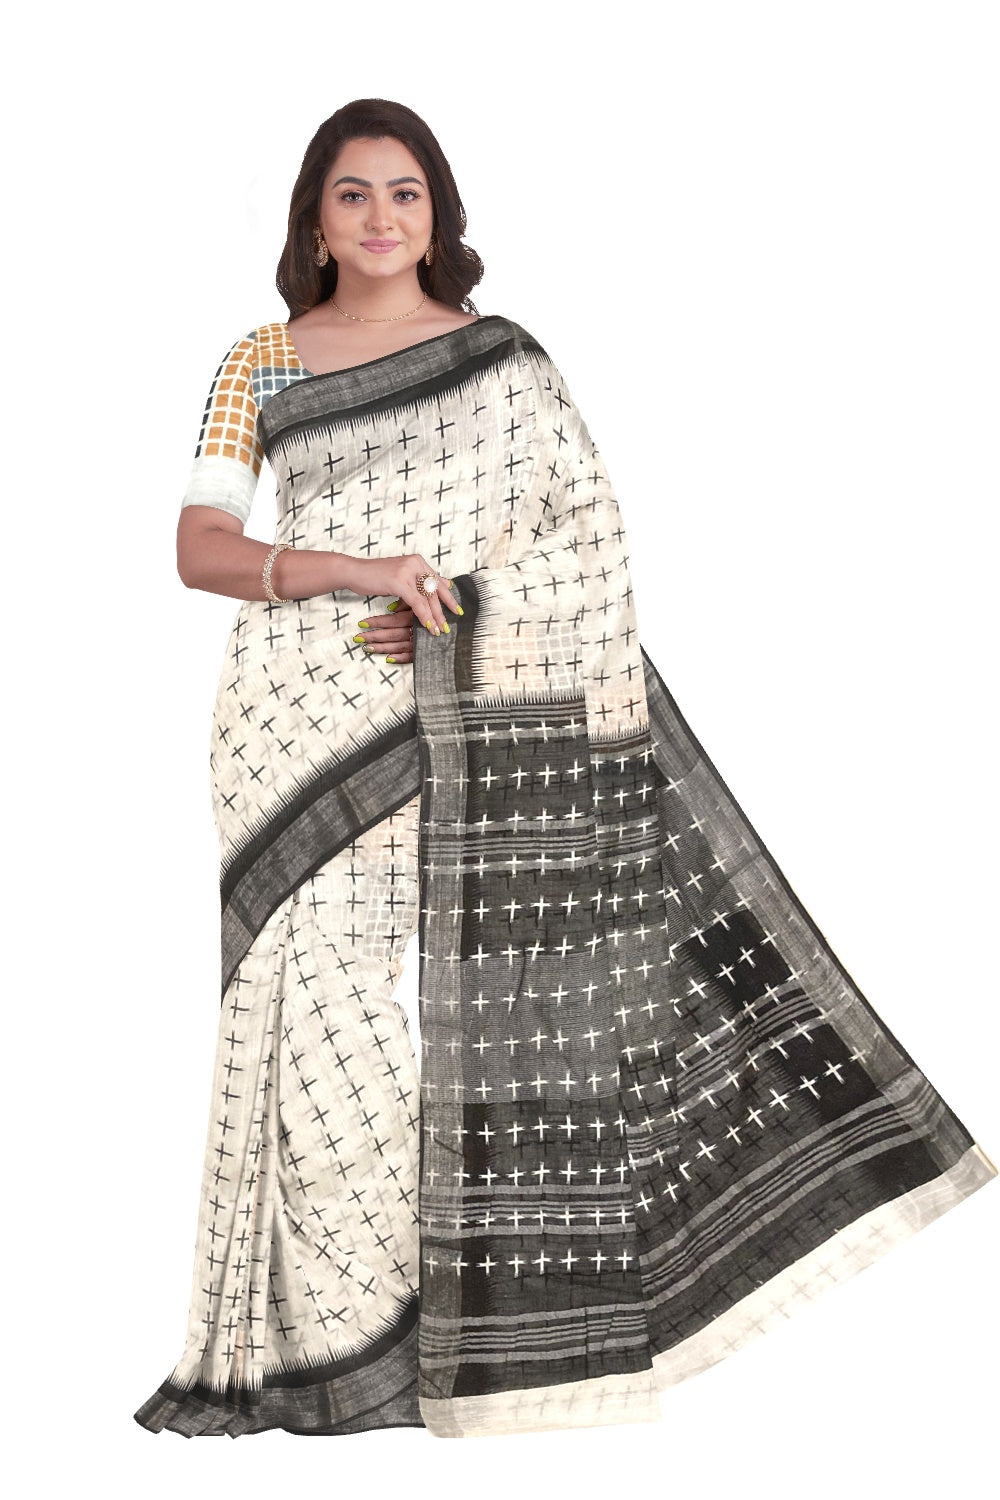 Southloom Linen White Saree with Black Designer Prints and Tassels works on Pallu